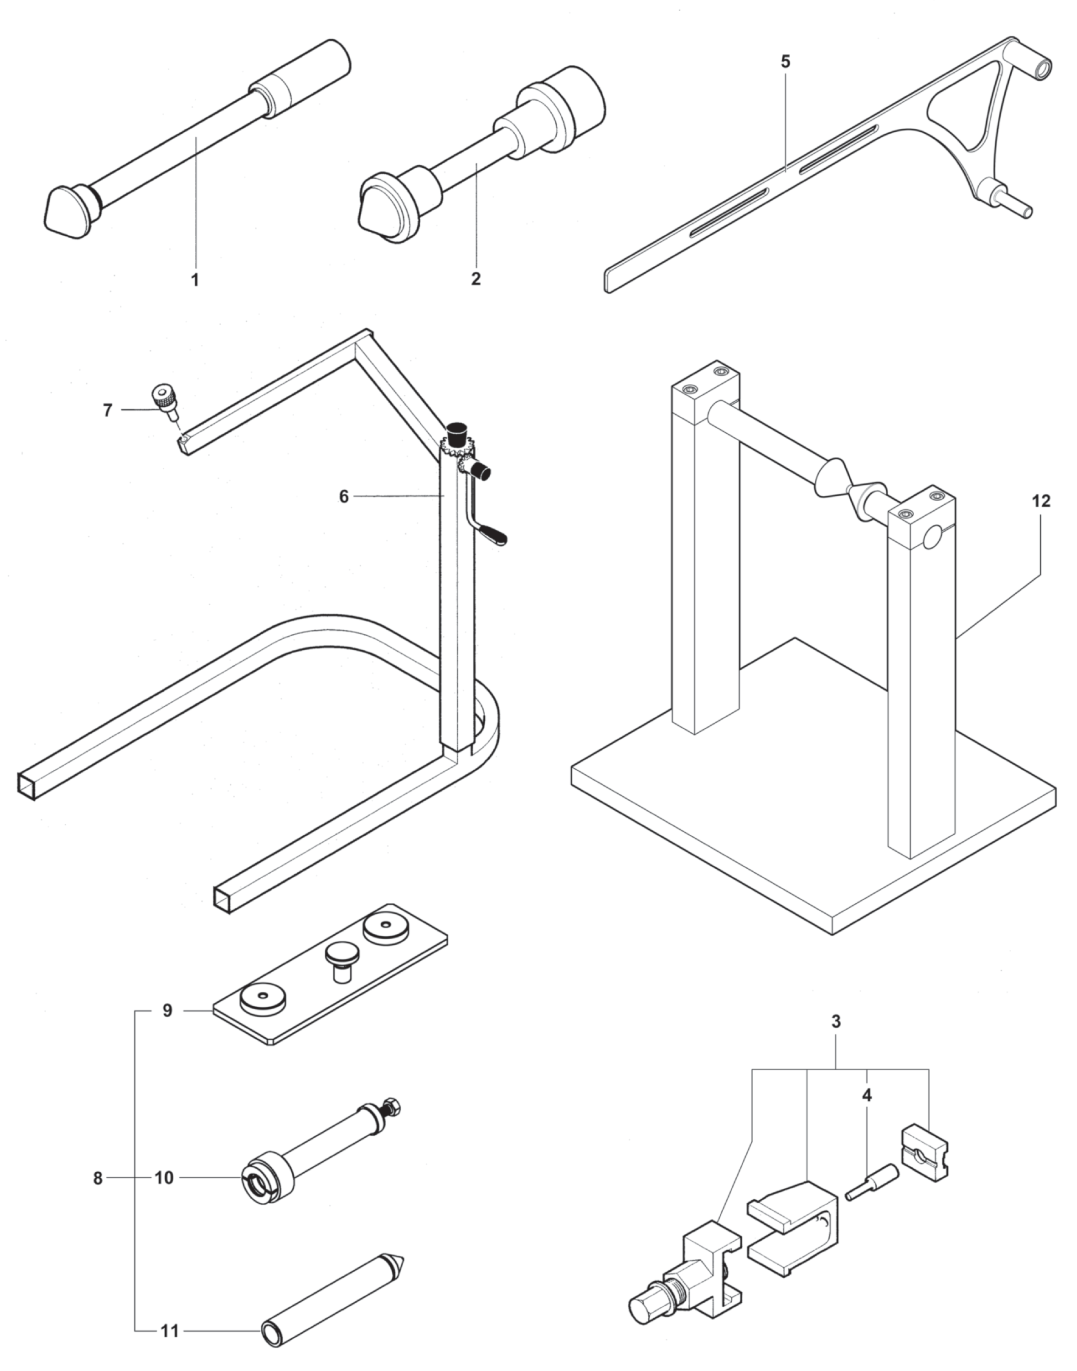 Service Tools Frame


